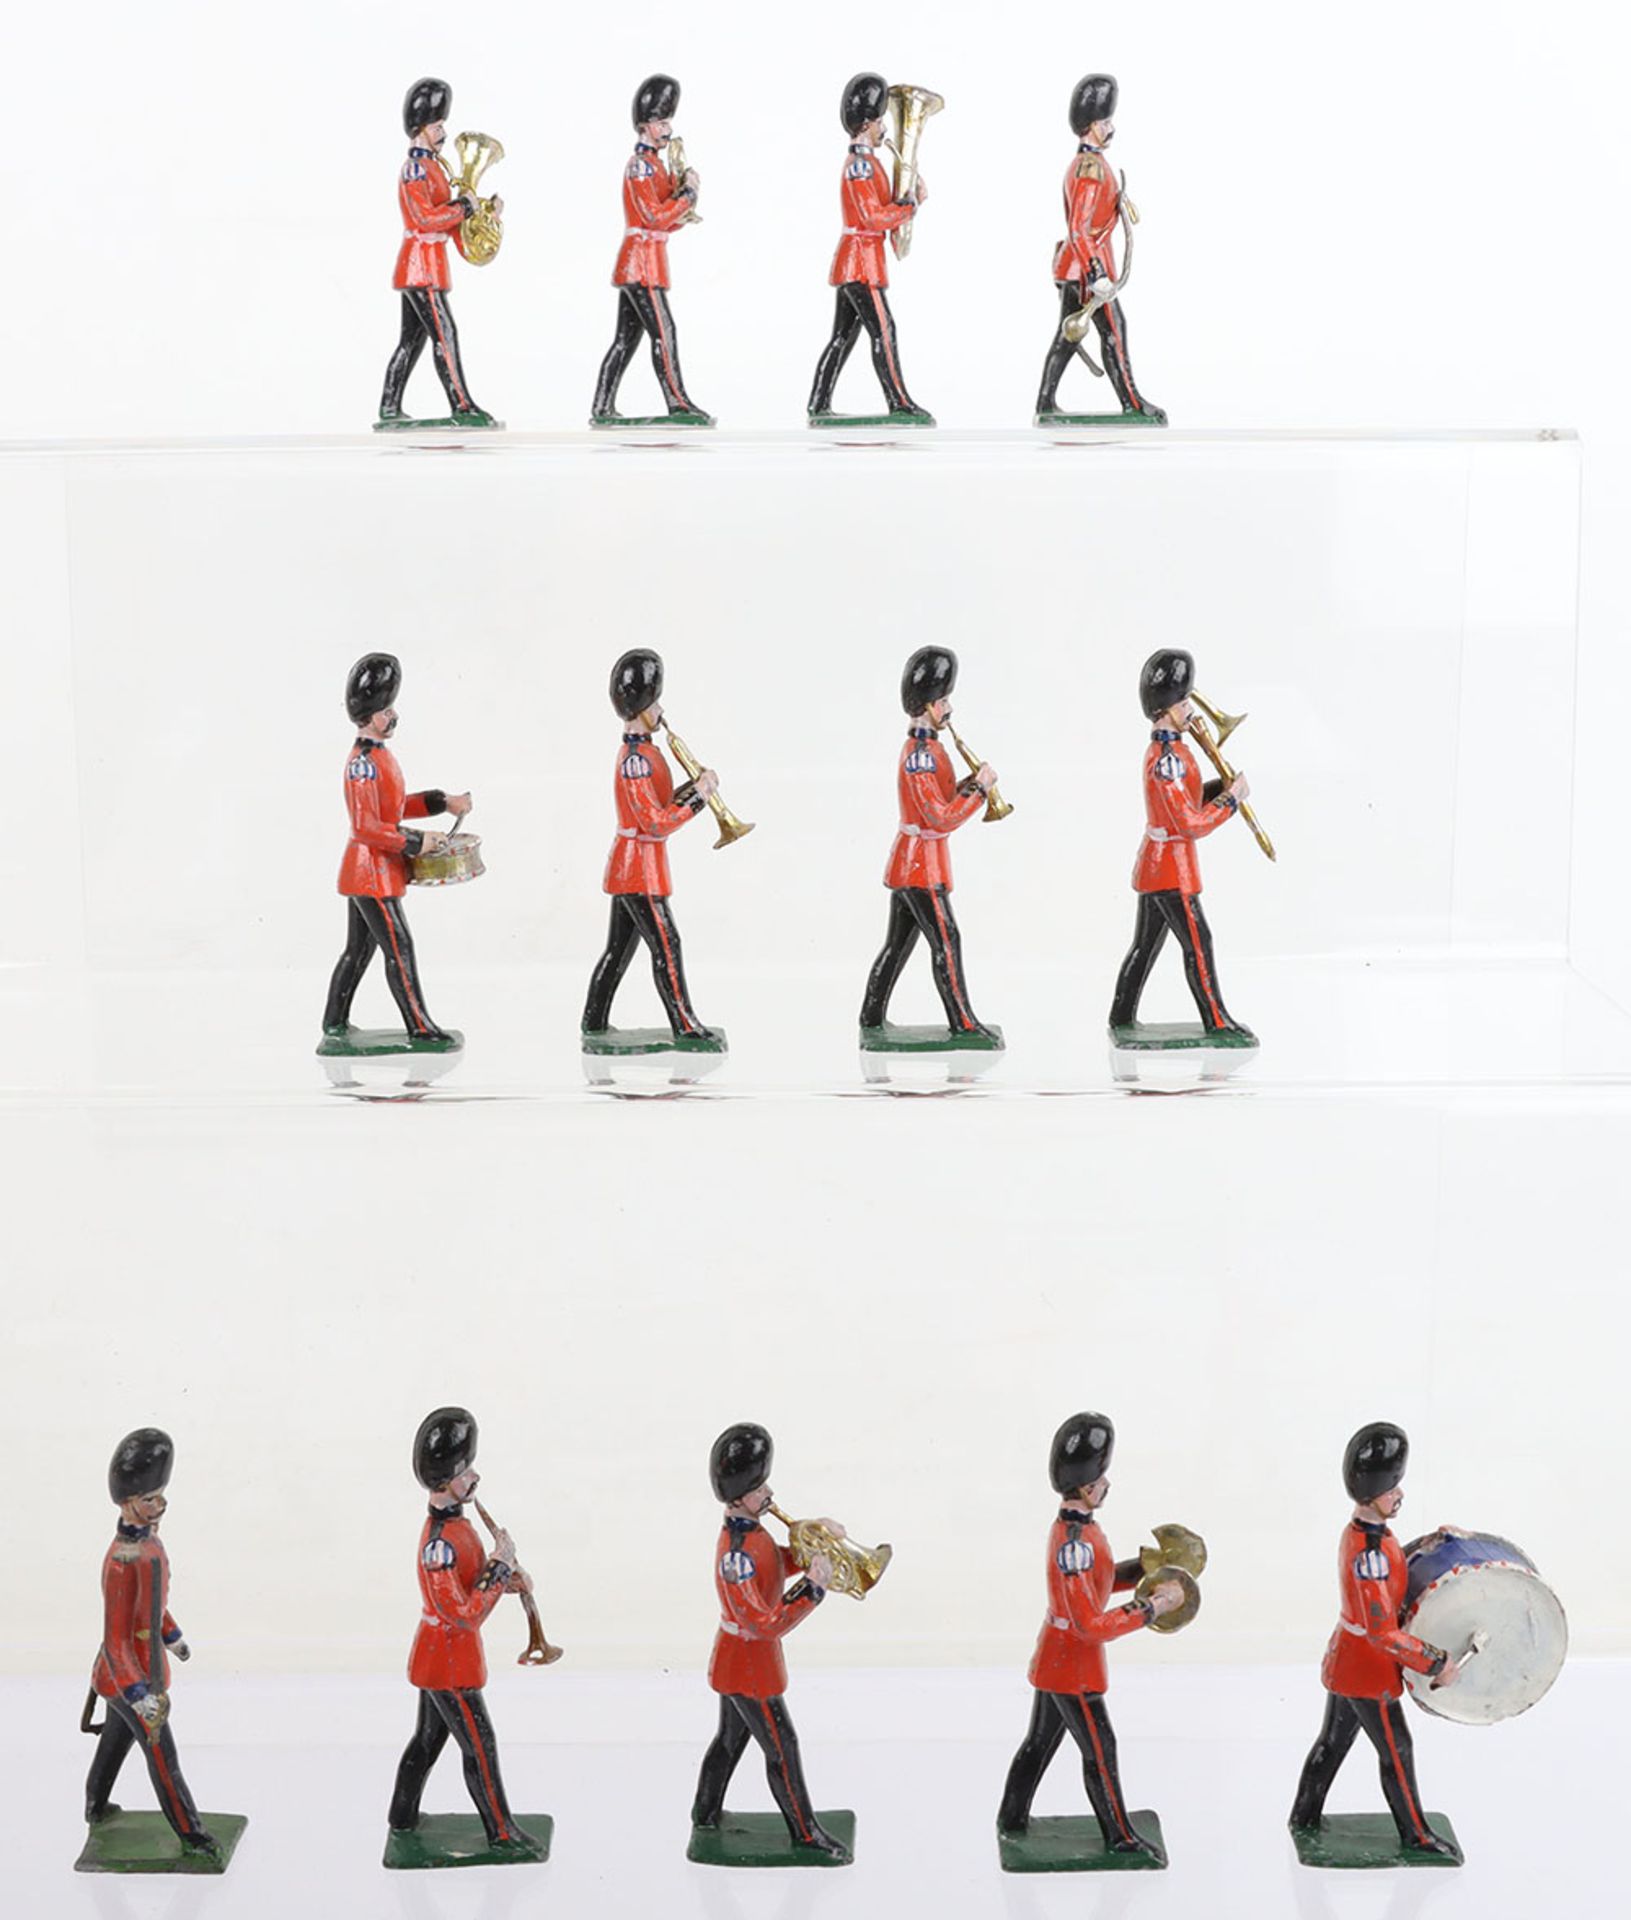 Band of the Grenadier Guards 60mm size - Image 4 of 4